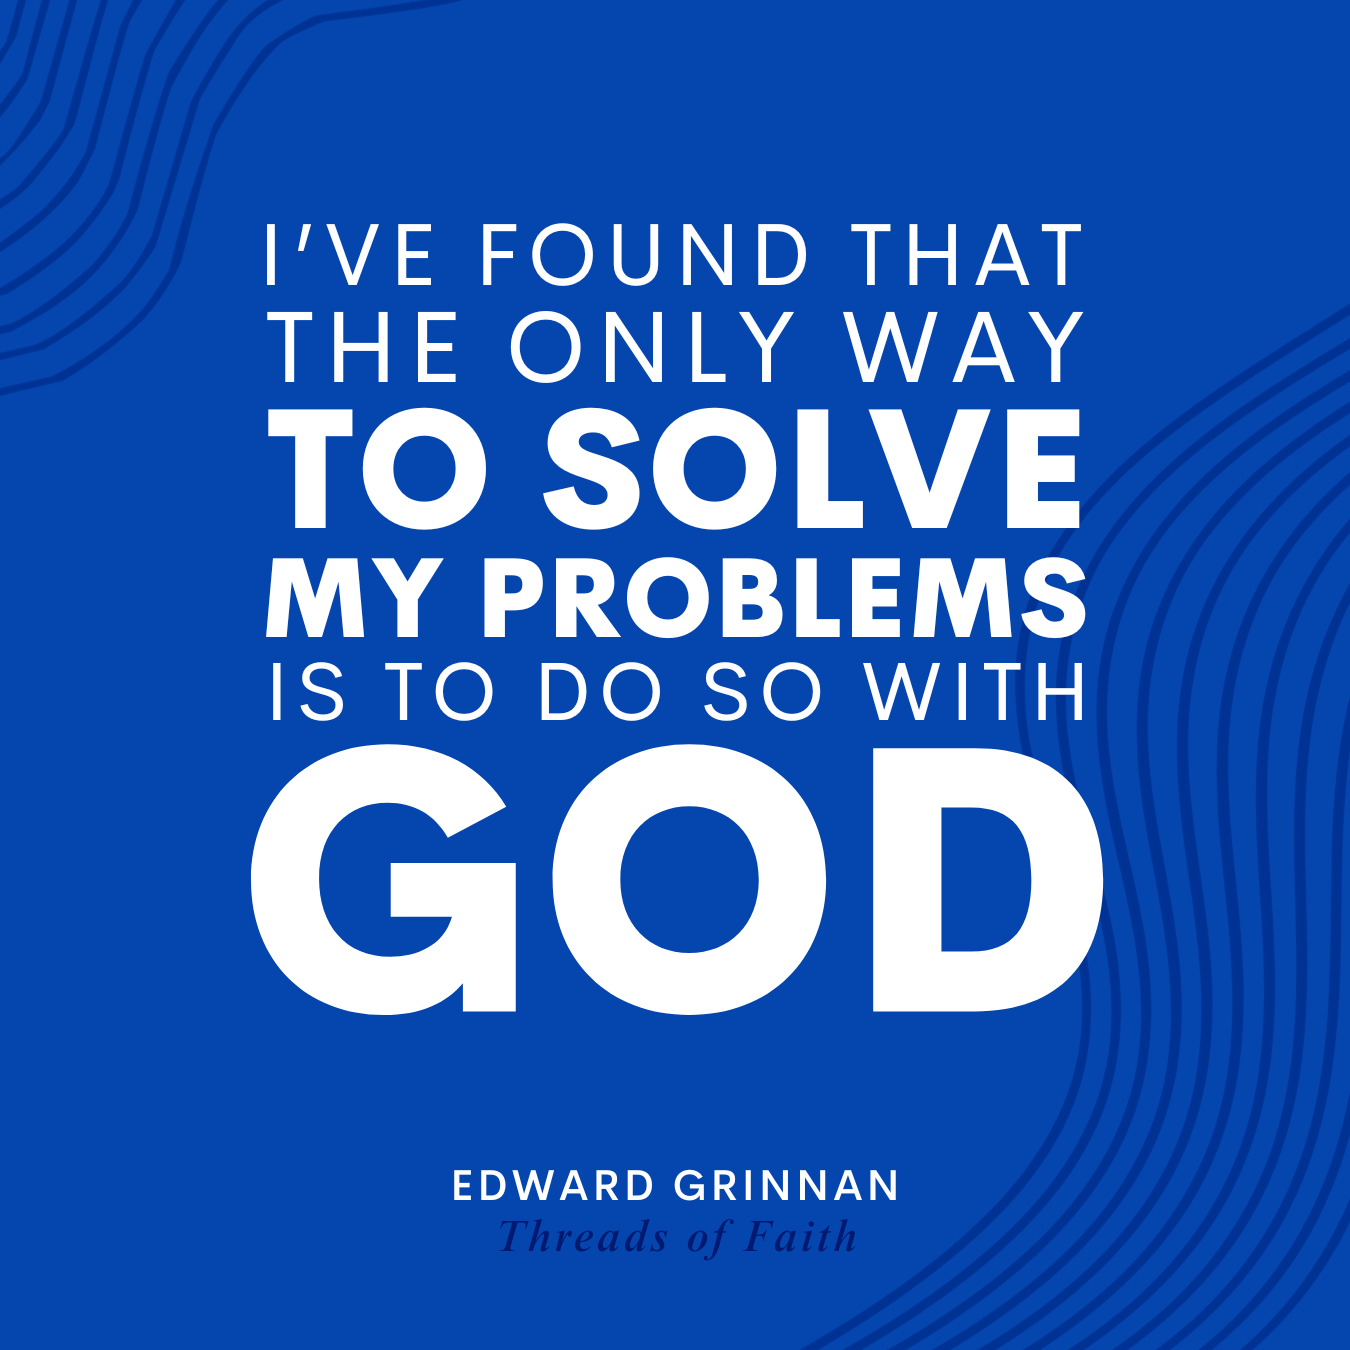 Solve Problems with God Quote by Edward Grinnan